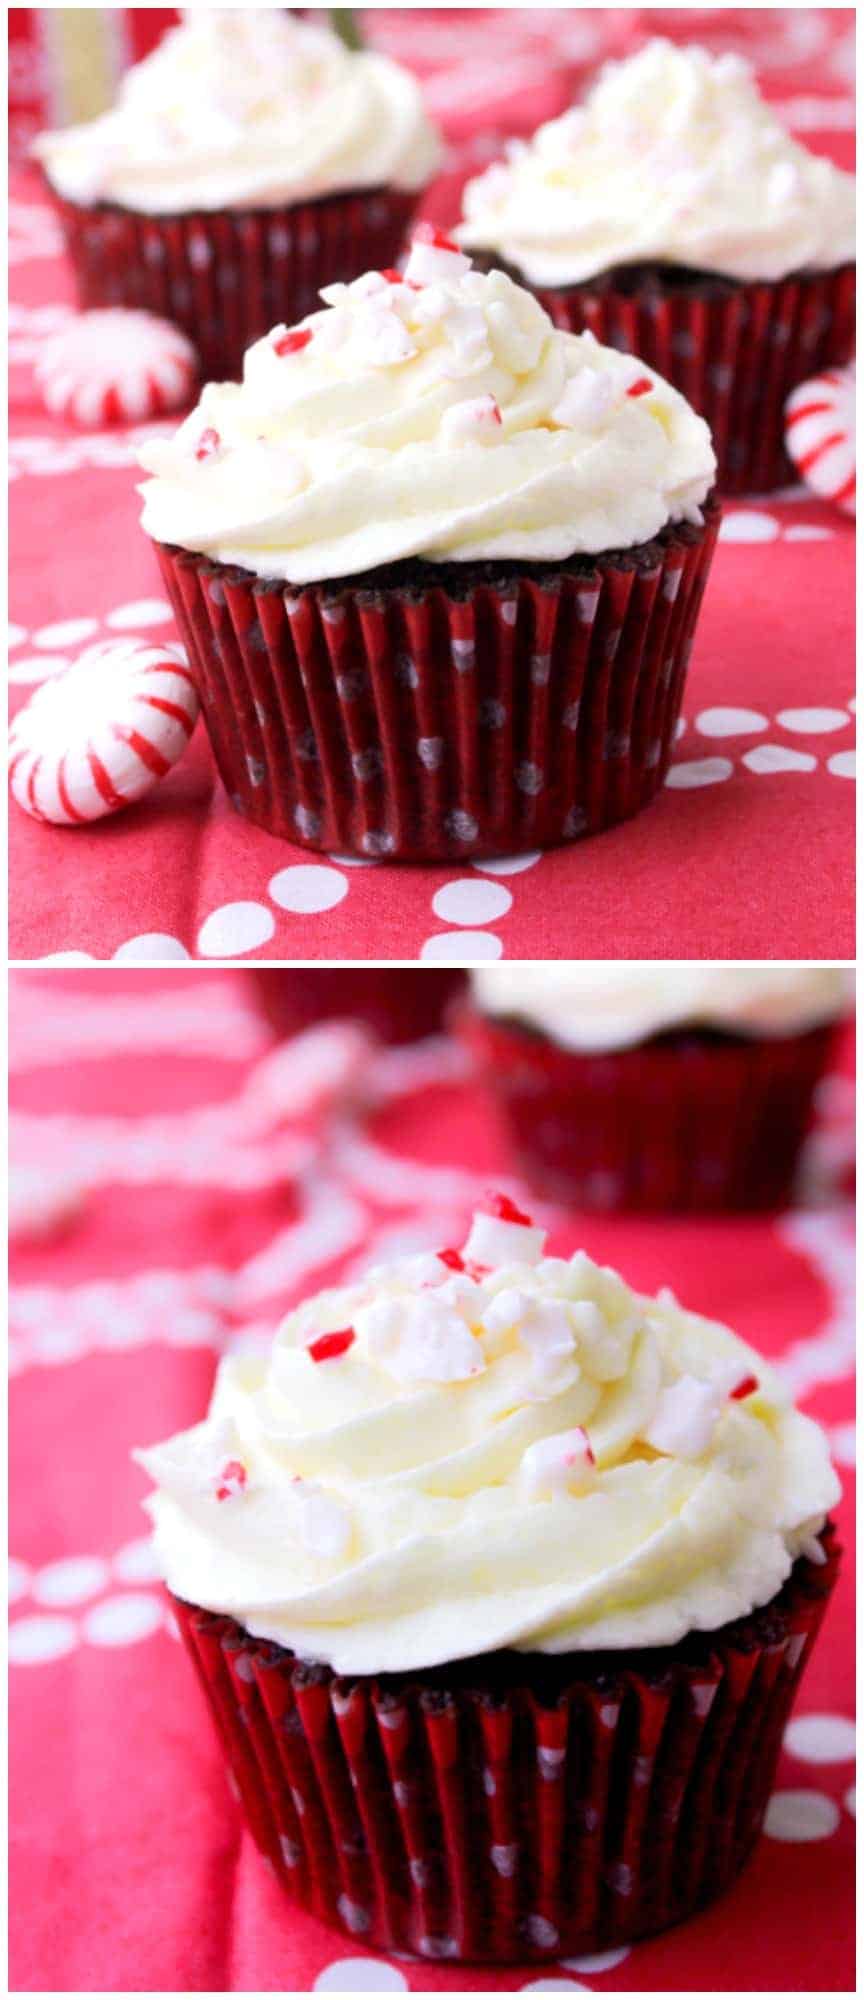 Frosted cupcakes on a red tablecloth.